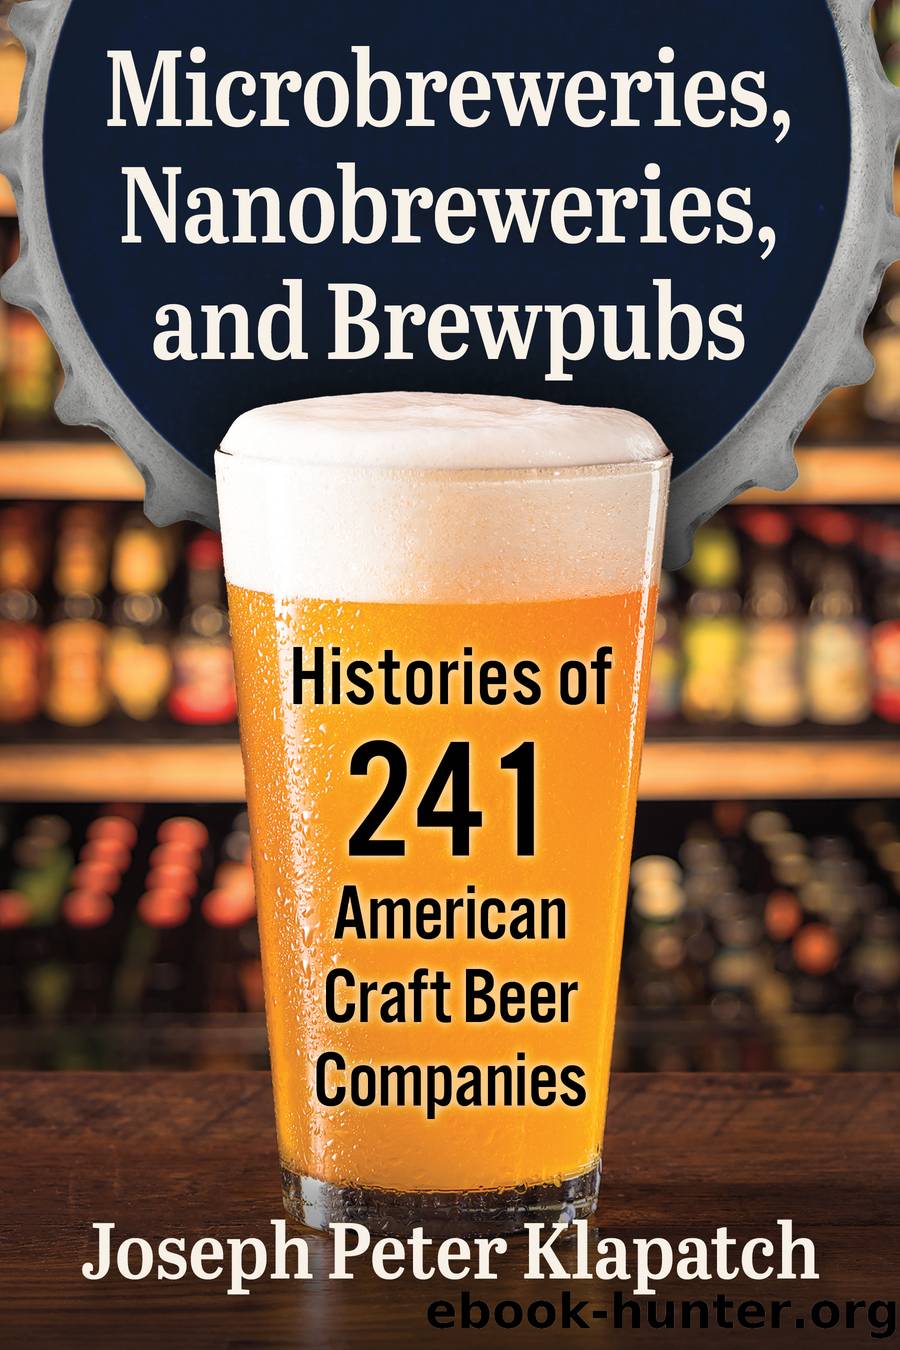 Microbreweries, Nanobreweries, and Brewpubs: Histories of 241 American Craft Beer Companies by Joseph Peter Klapatch